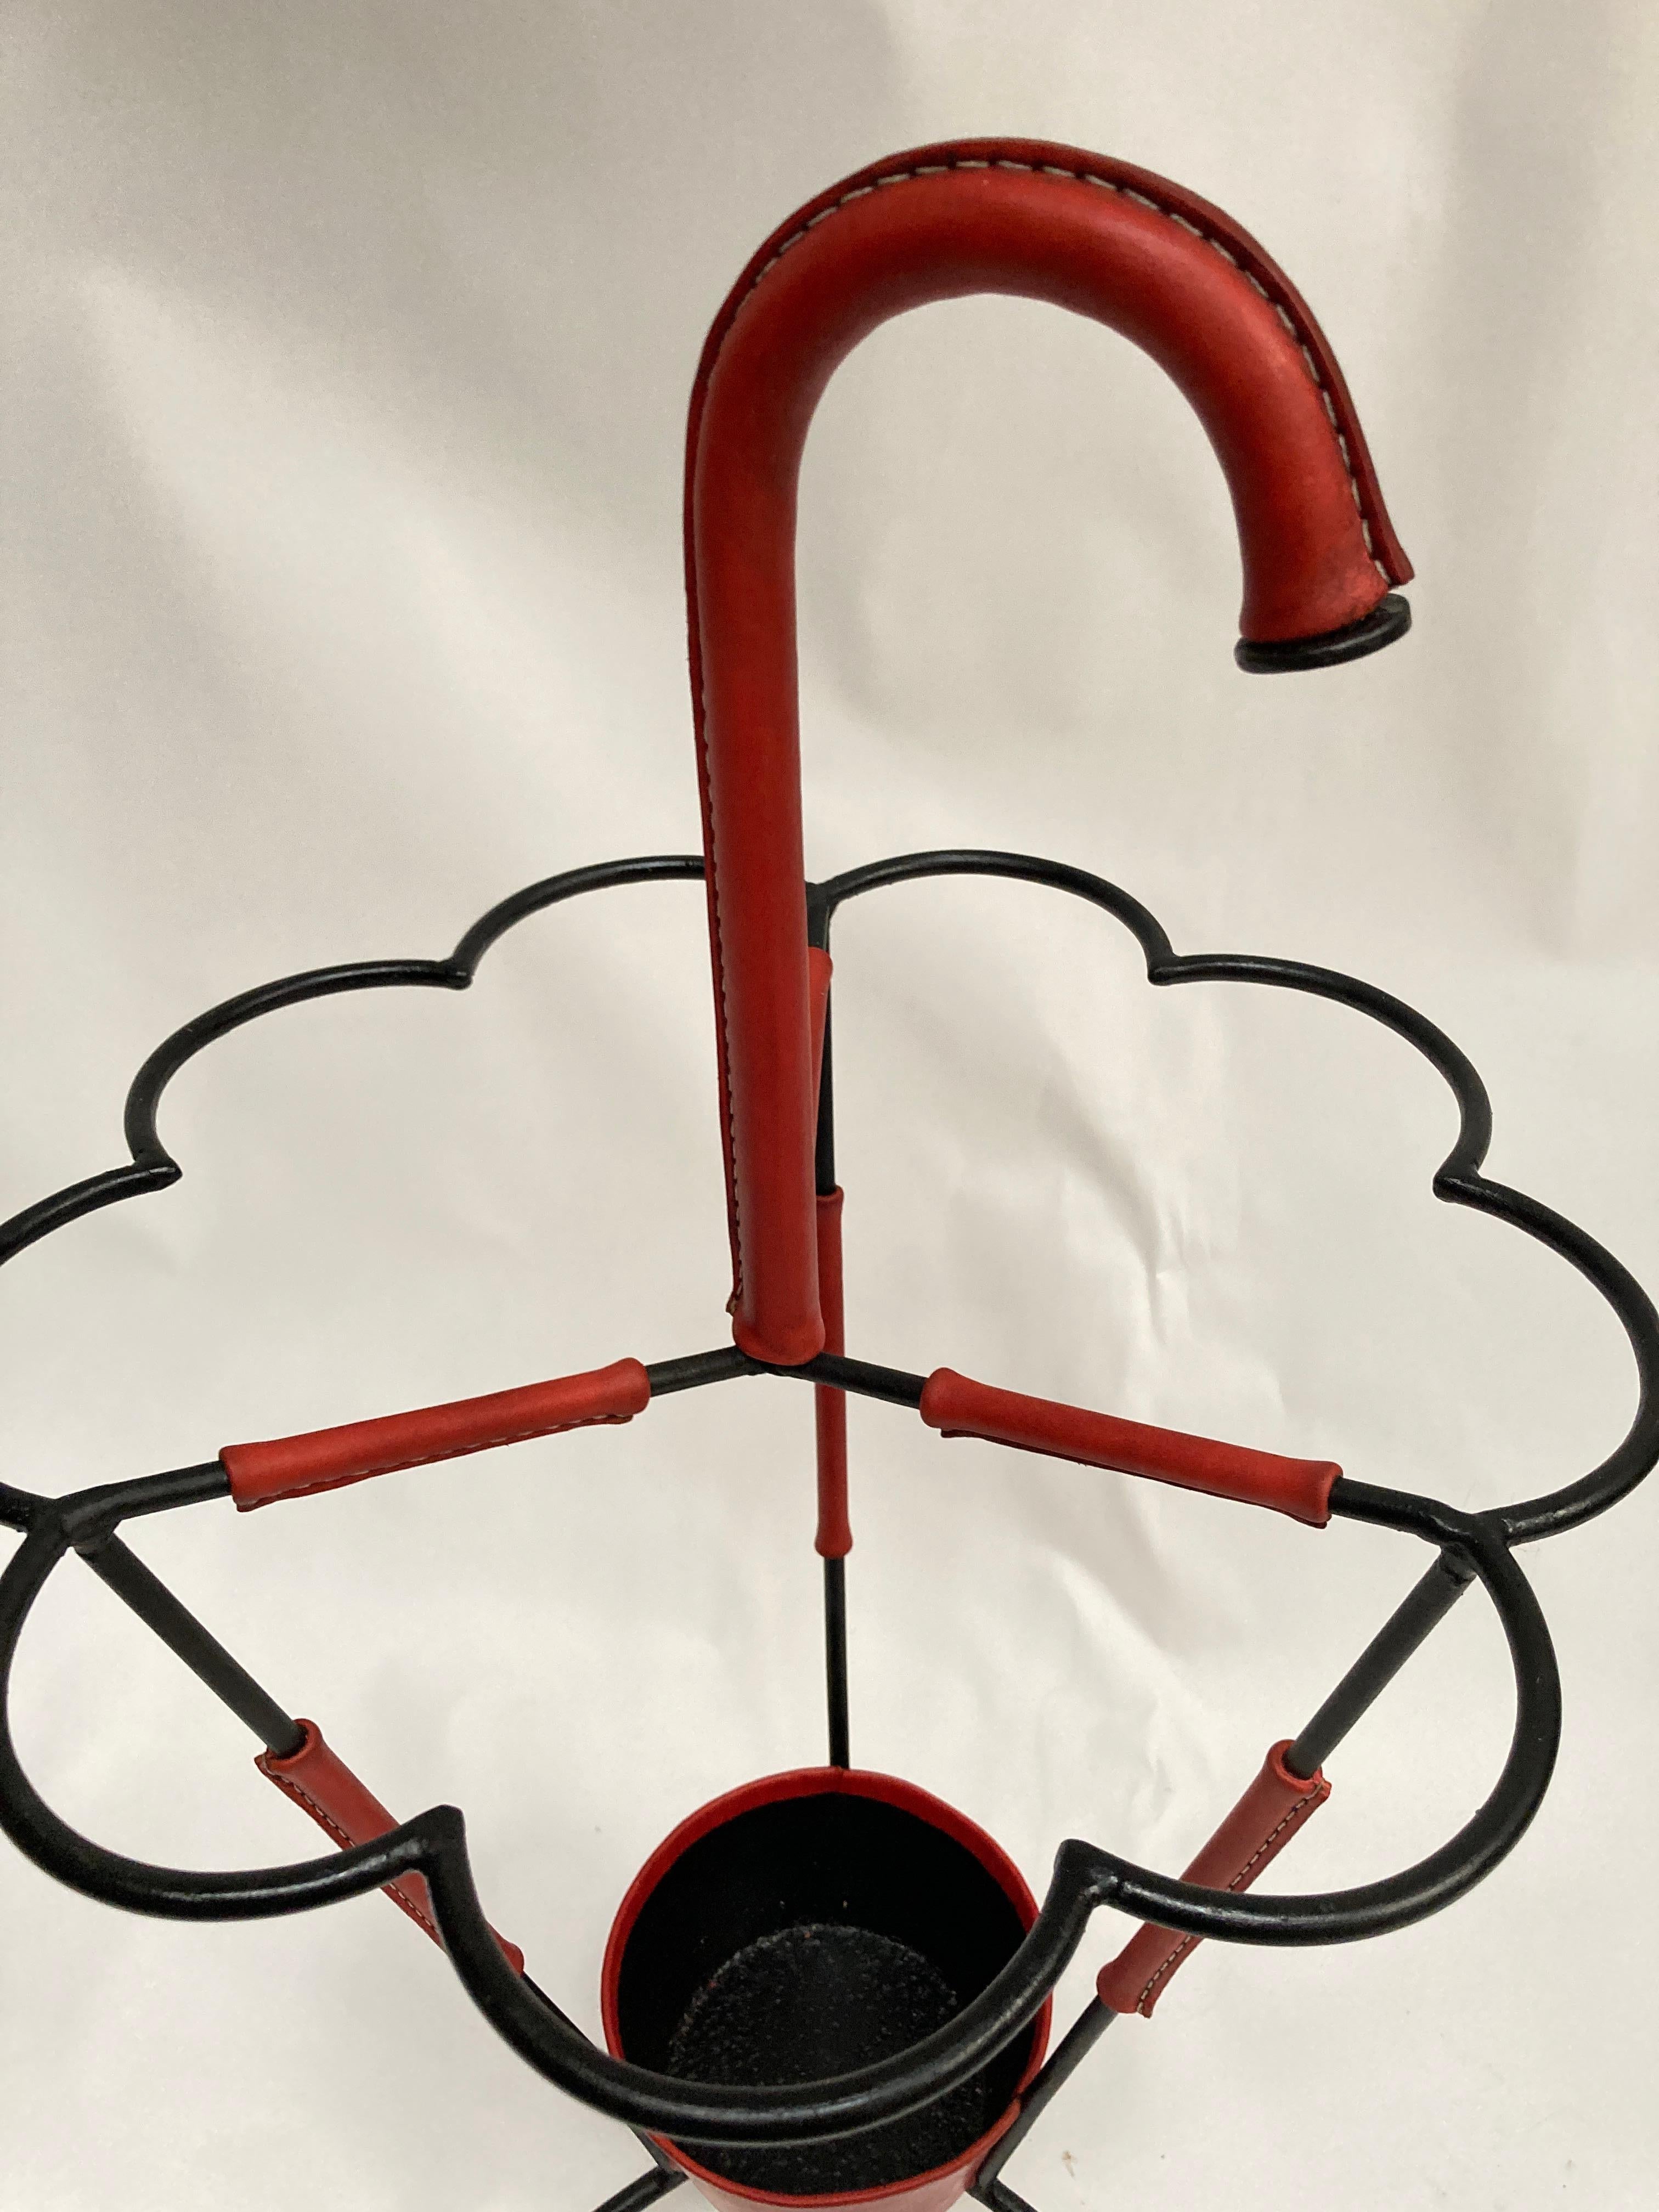 Very rare umbrella stand in metal and Red stitched leather
Great condition